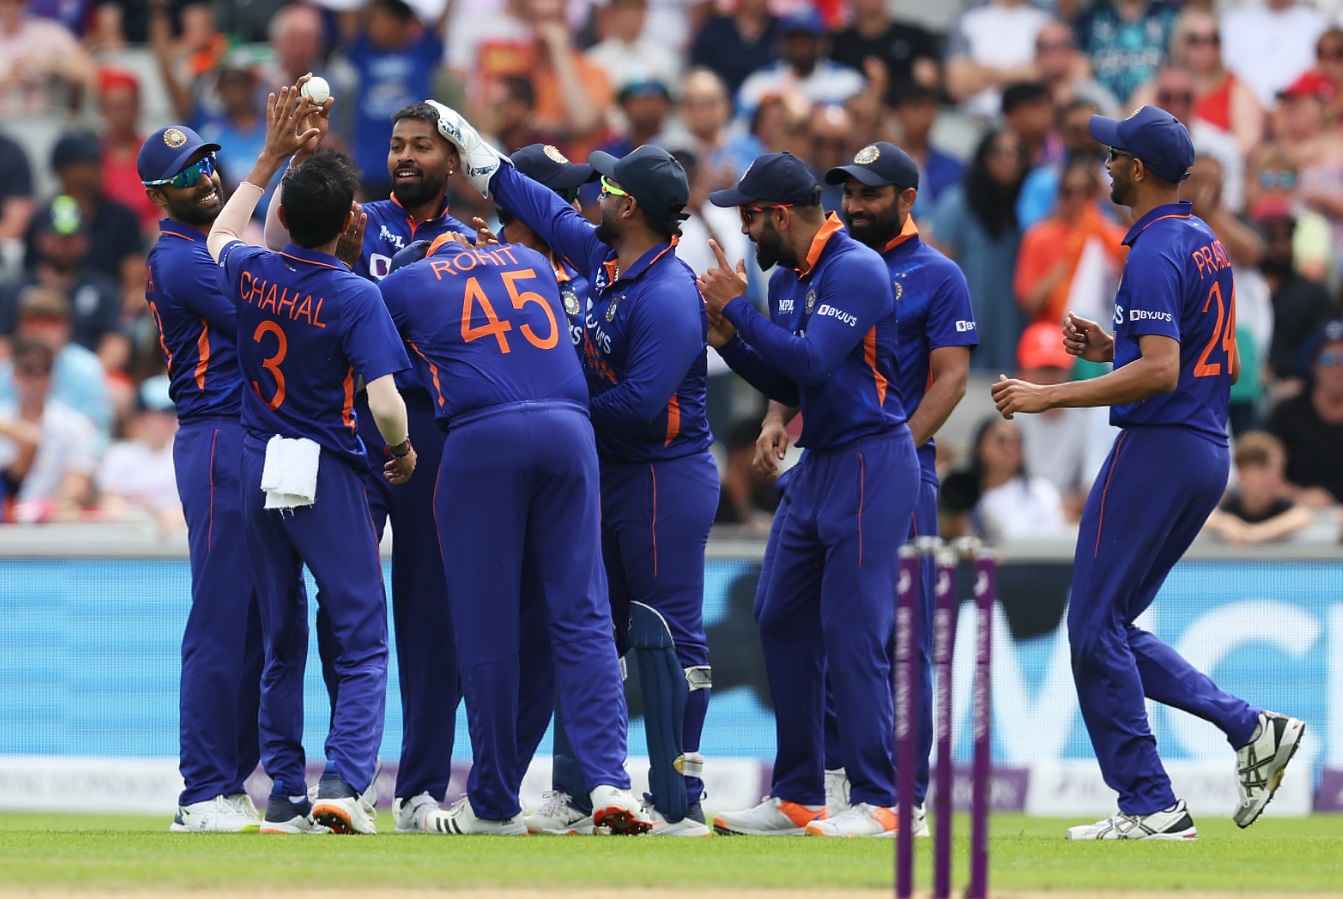 ENG vs IND 2022, 3rd ODI | Hardik Pandya used ground's dimensions really well while bowling, remarks Rohit Sharma